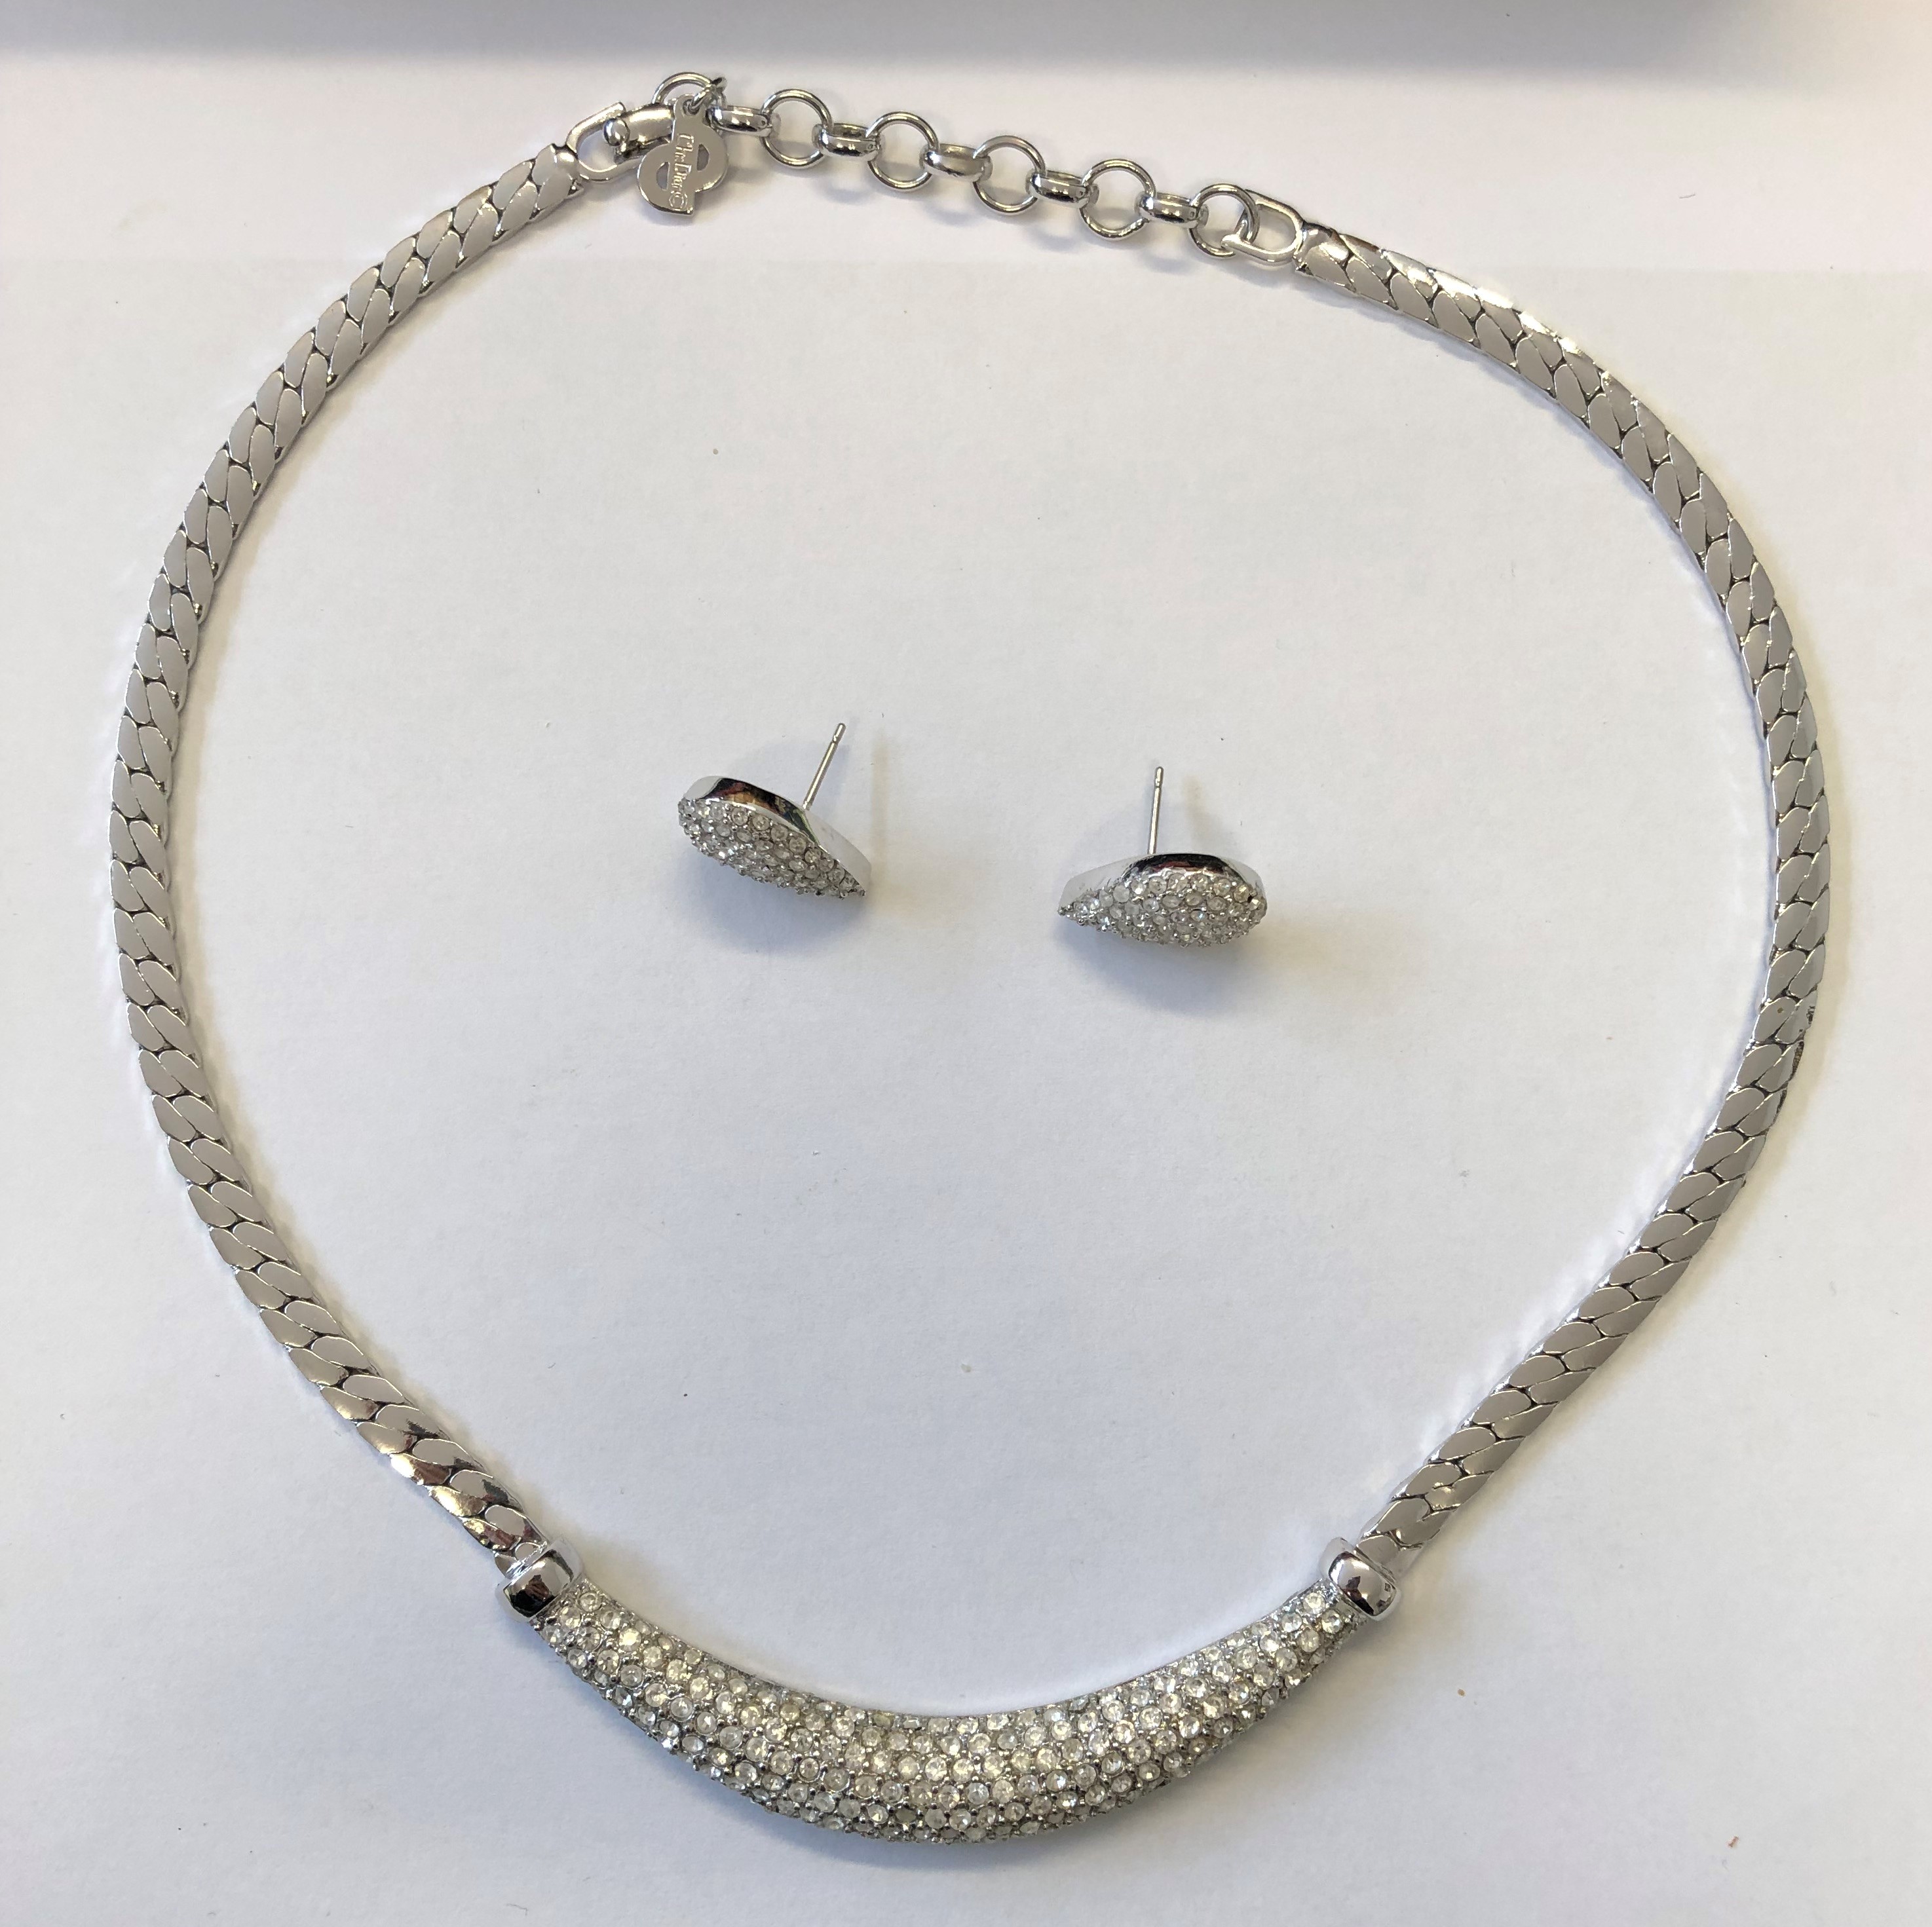 CHRISTIAN DIOR FLAT LINK PAVE NECKLACE AND A PAIR OF DROPPER EARRINGS